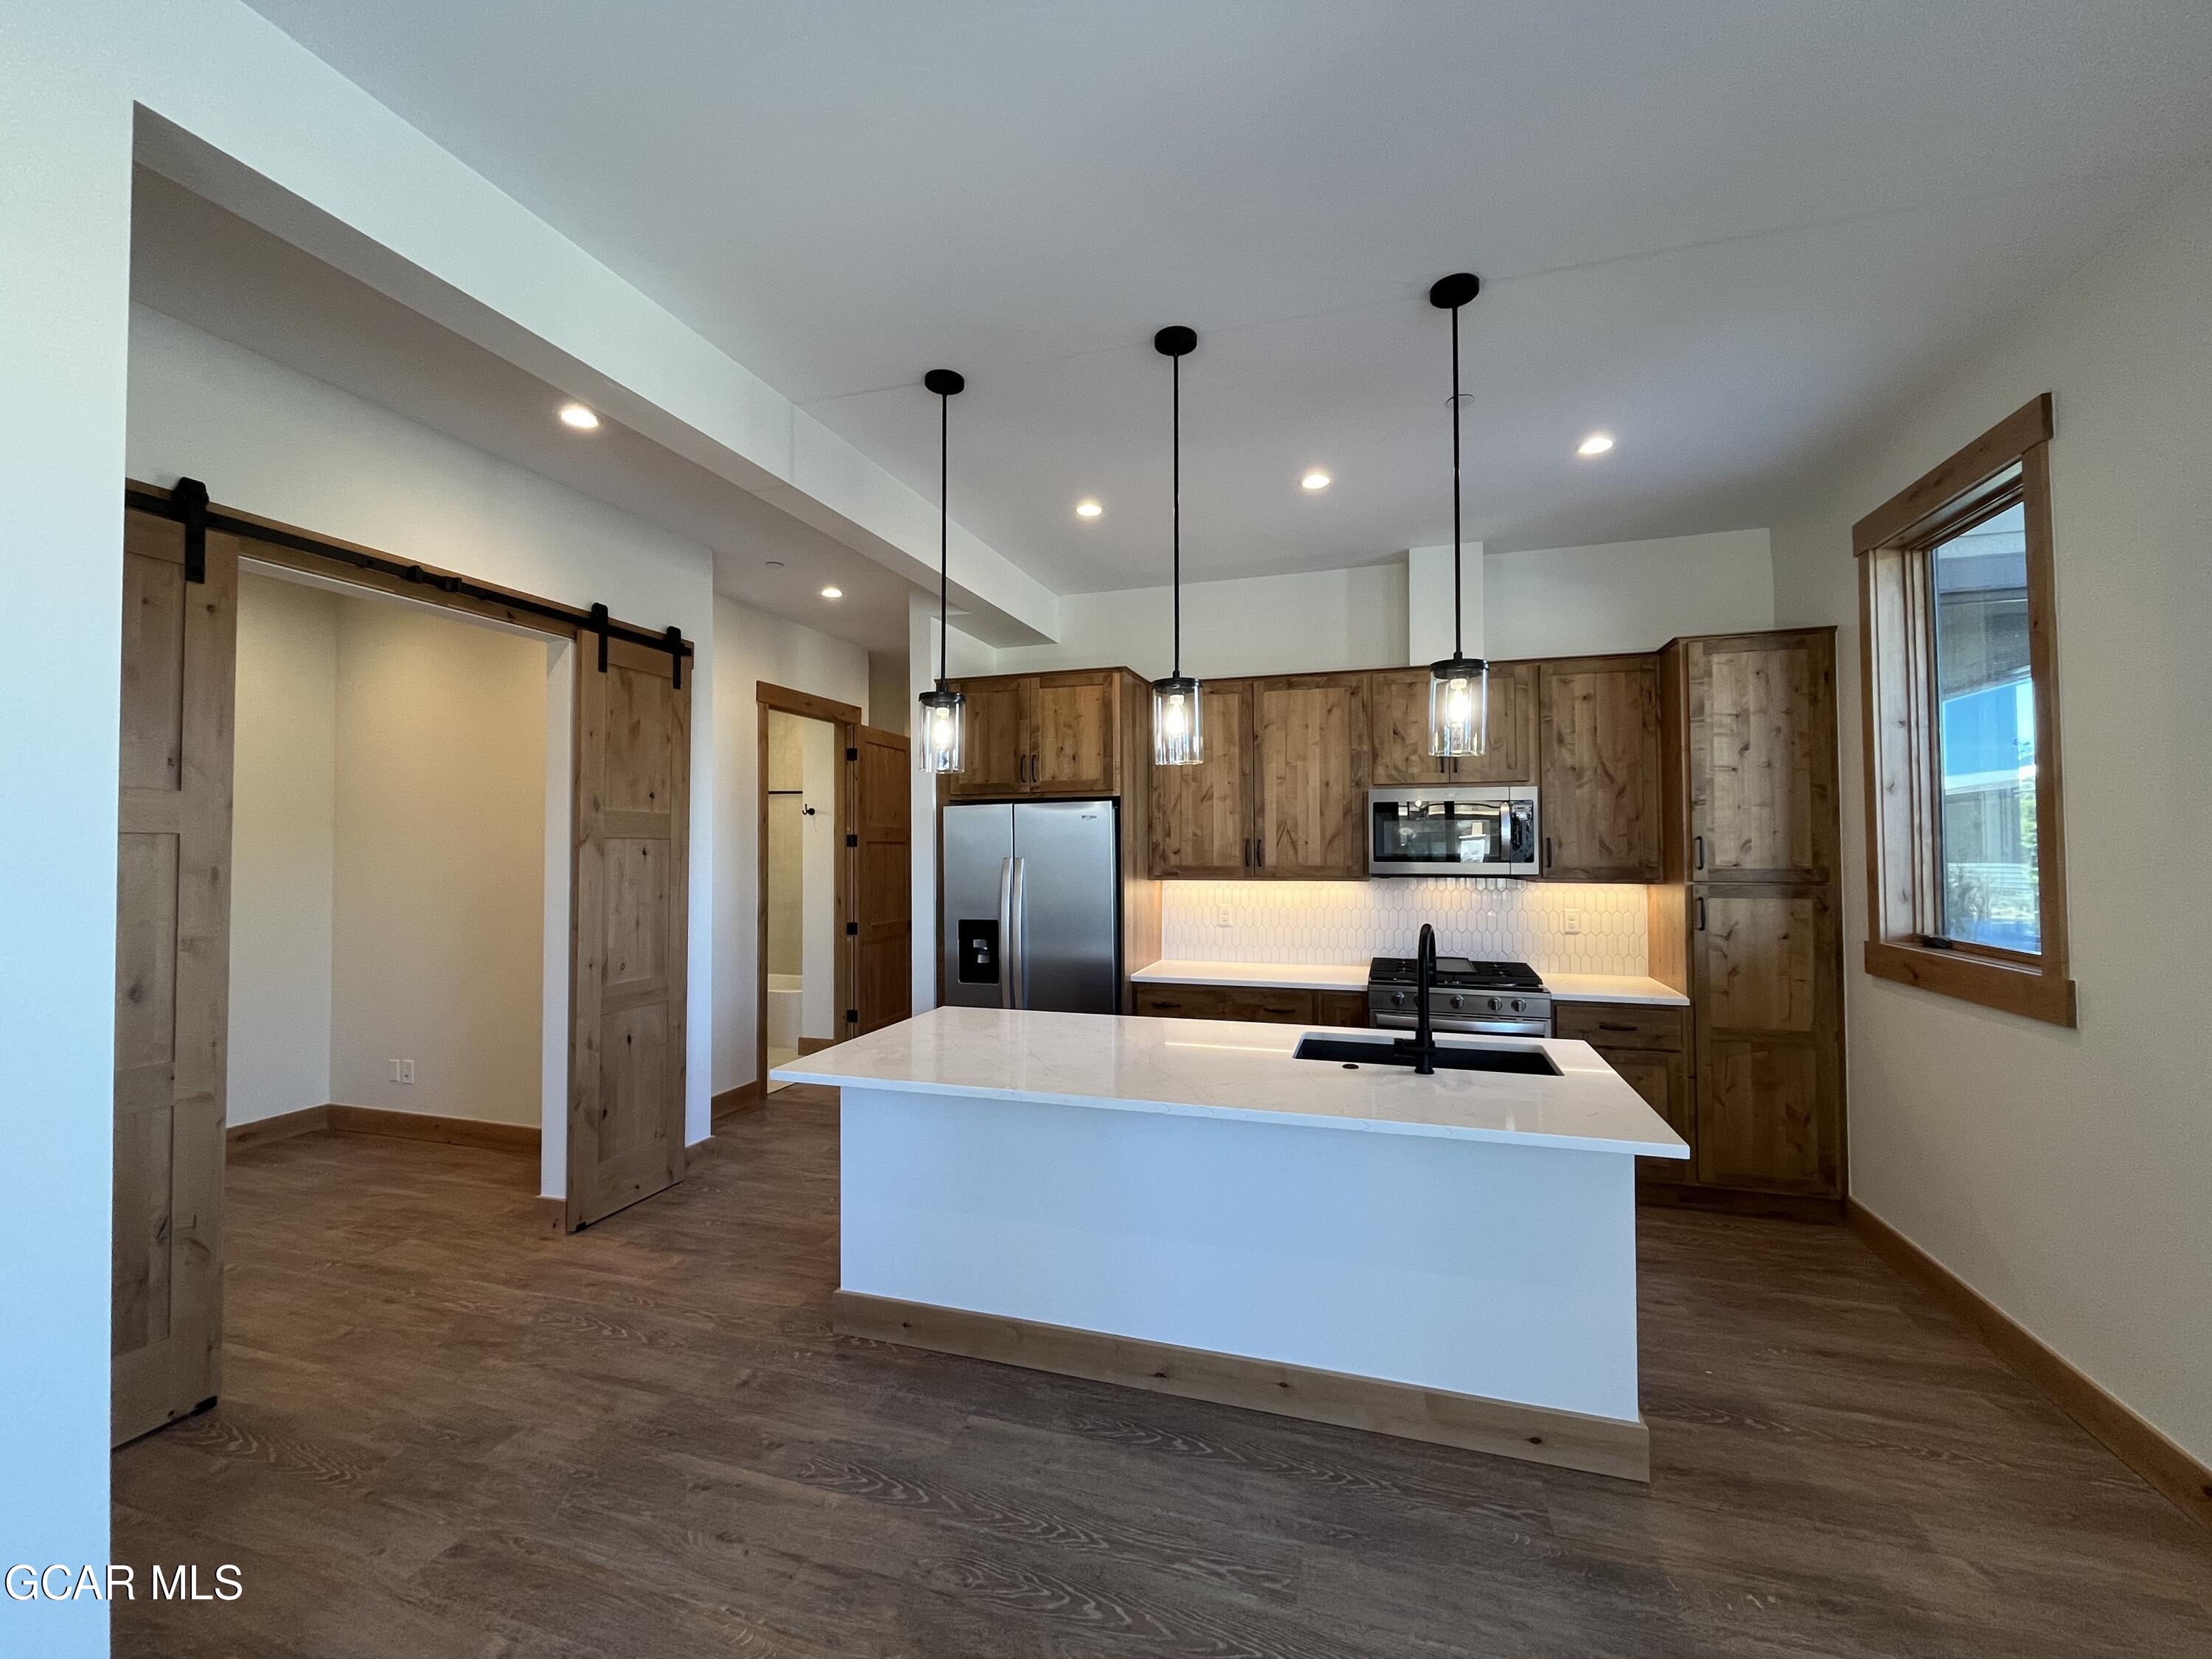 a large kitchen with kitchen island a counter top space a sink stainless steel appliances and cabinets